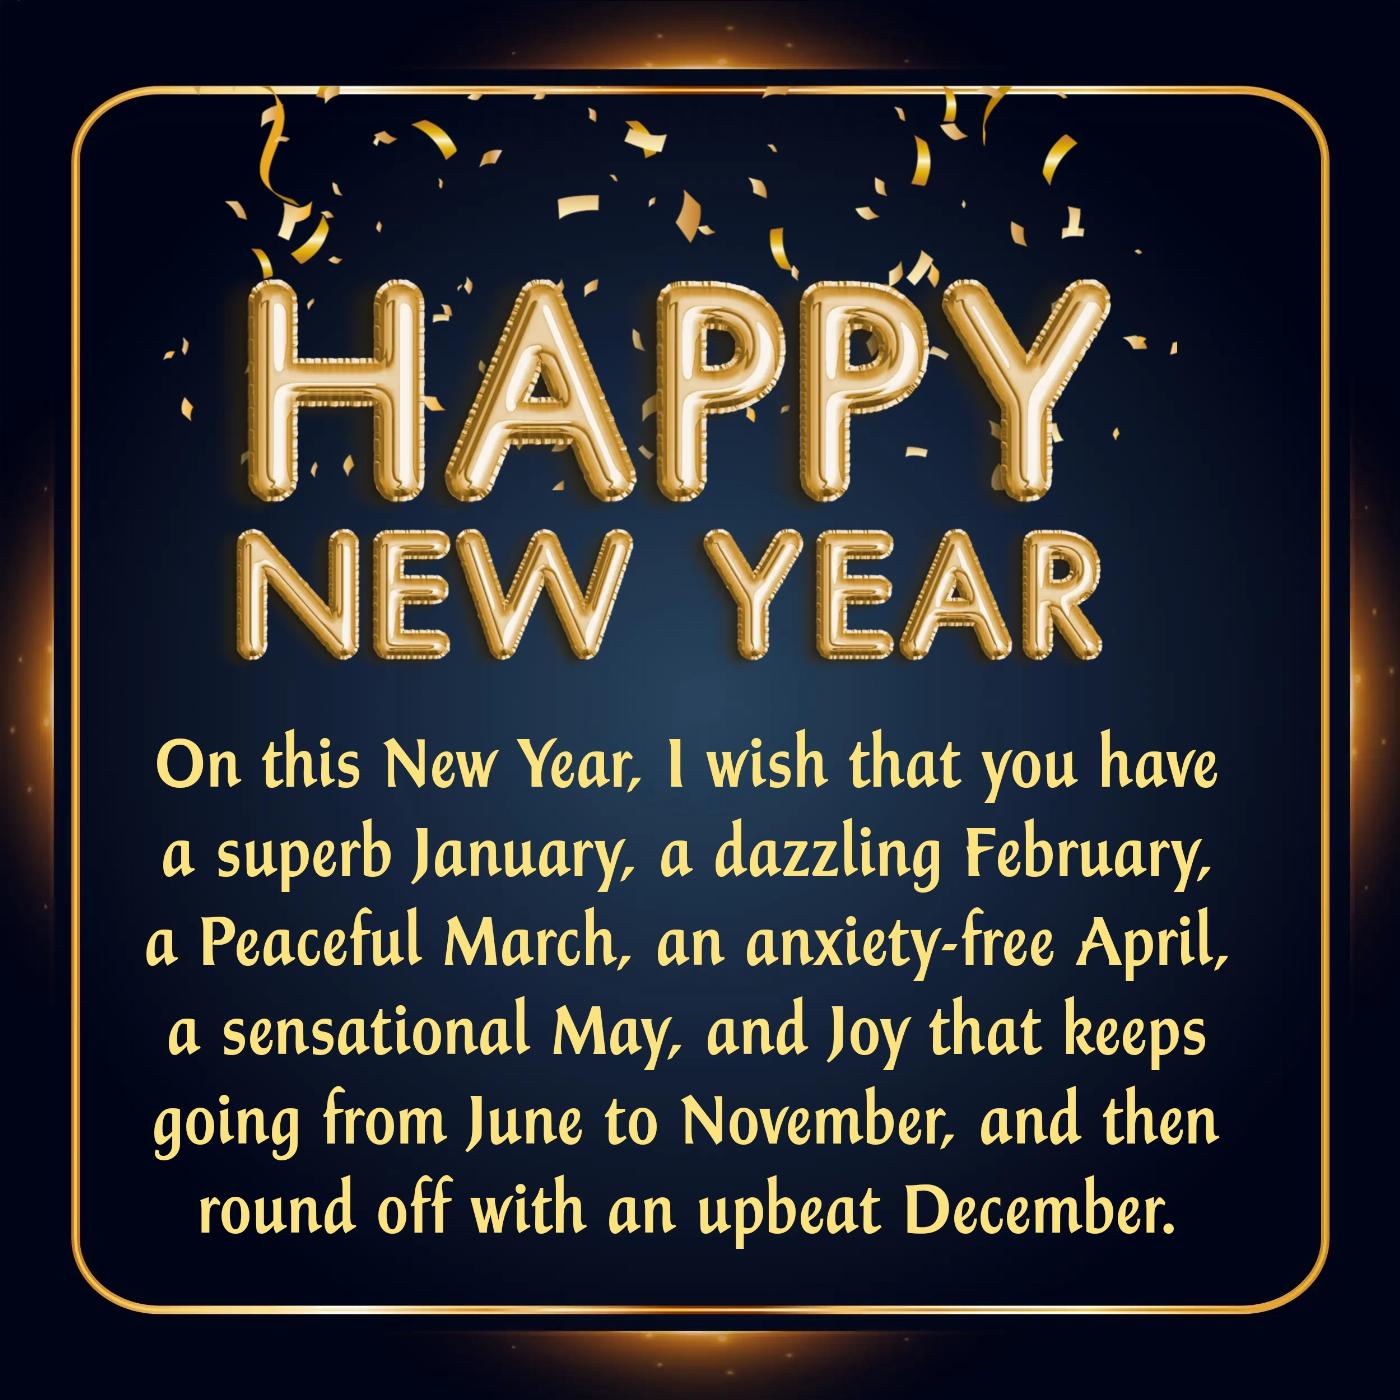  On this New Year I wish that you have a superb January